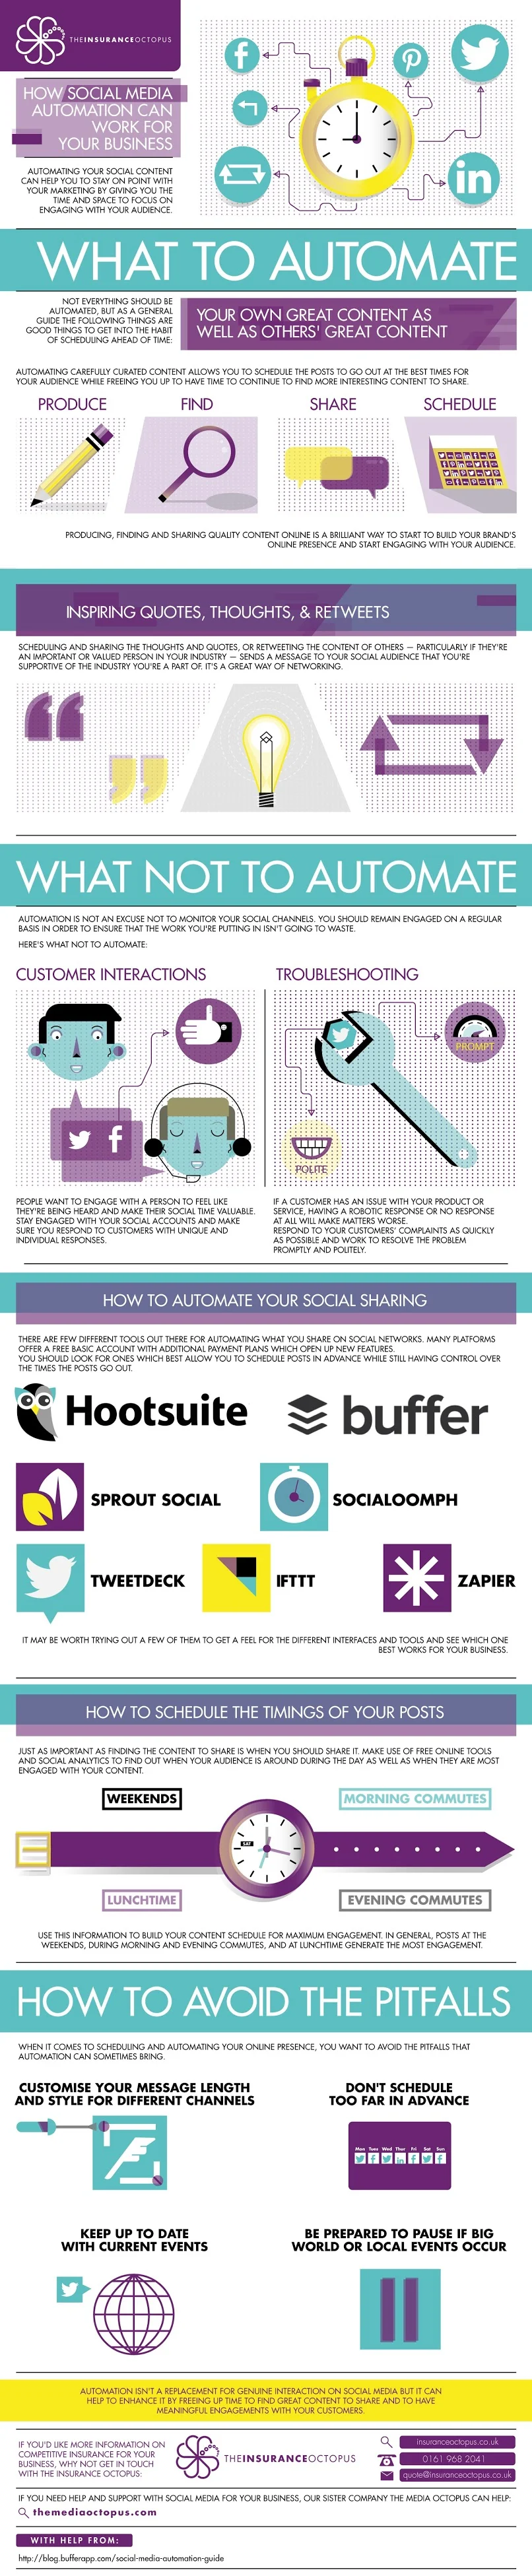 How Facebook, Twitter, Google+ Content Automation Can Work For Your Compnay - #infographic